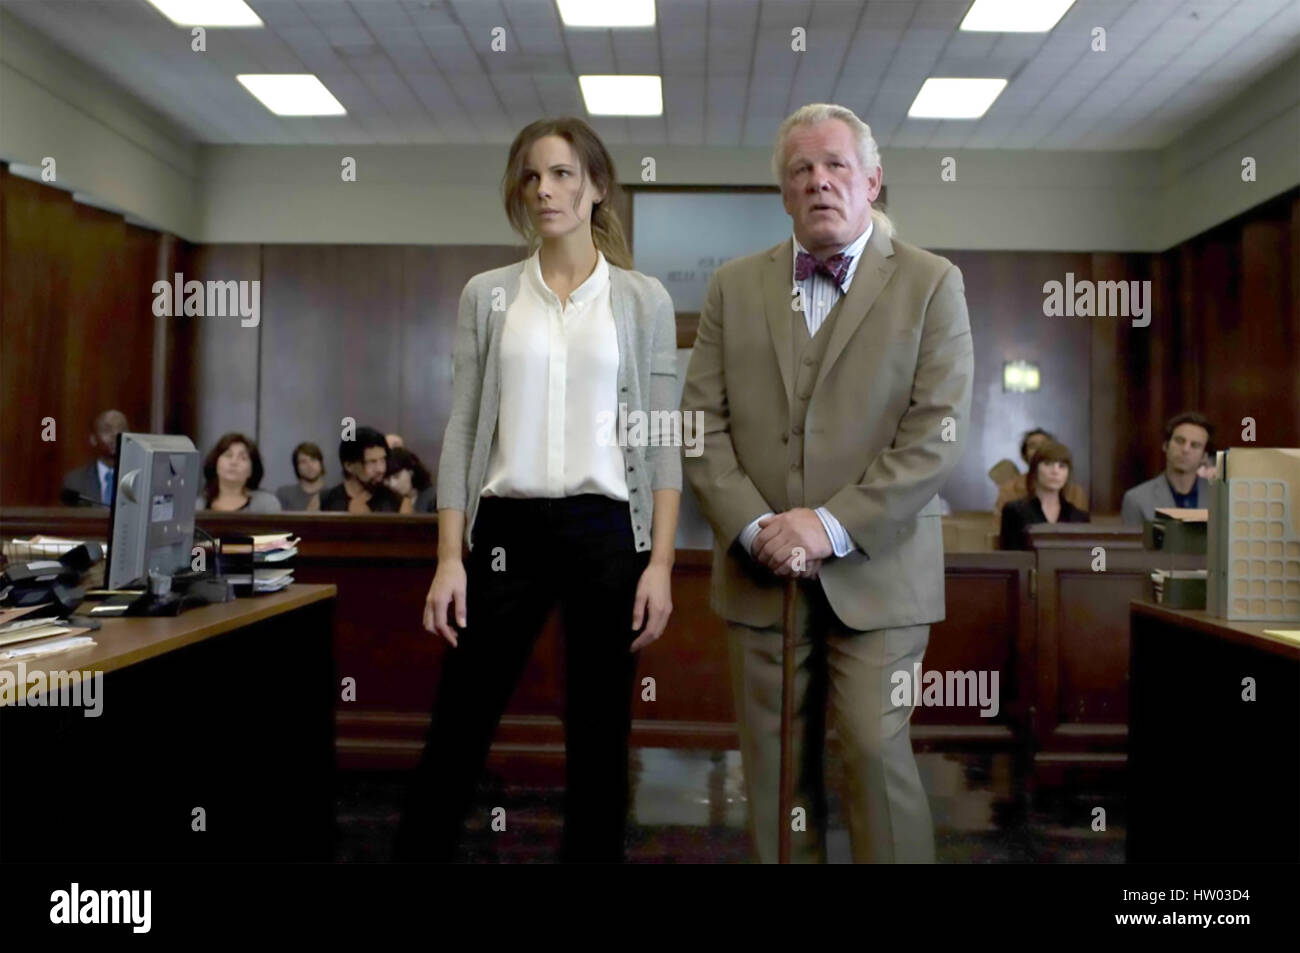 THE TRIALS OF CATE McCALL 2013 Sierra/Affinity film with Kate Beckinsale and Nick Nolte Stock Photo